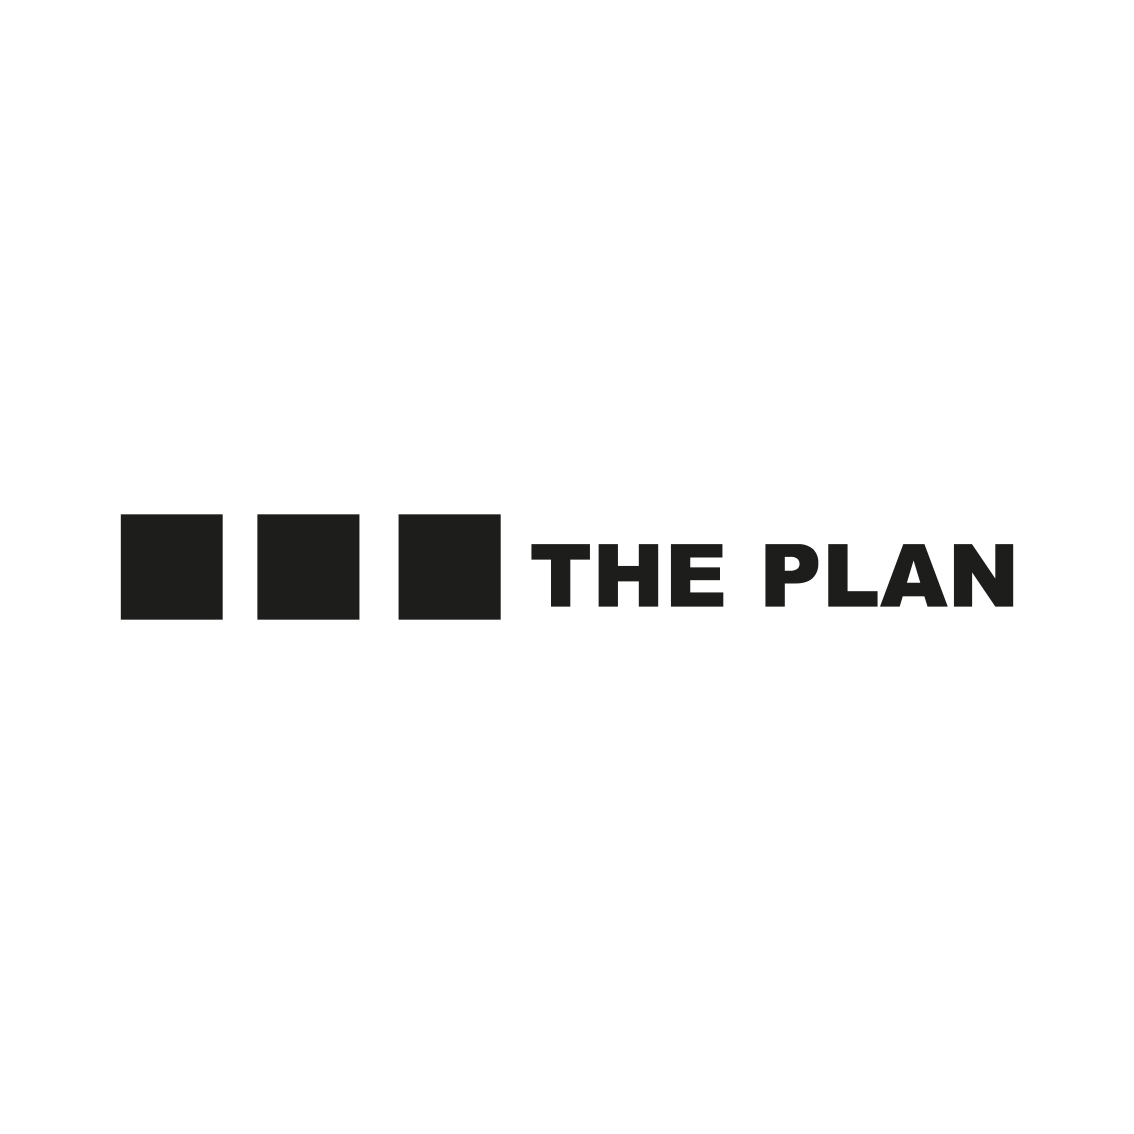 THE PLAN, 2023 MMAPROJECTS S.R.L.